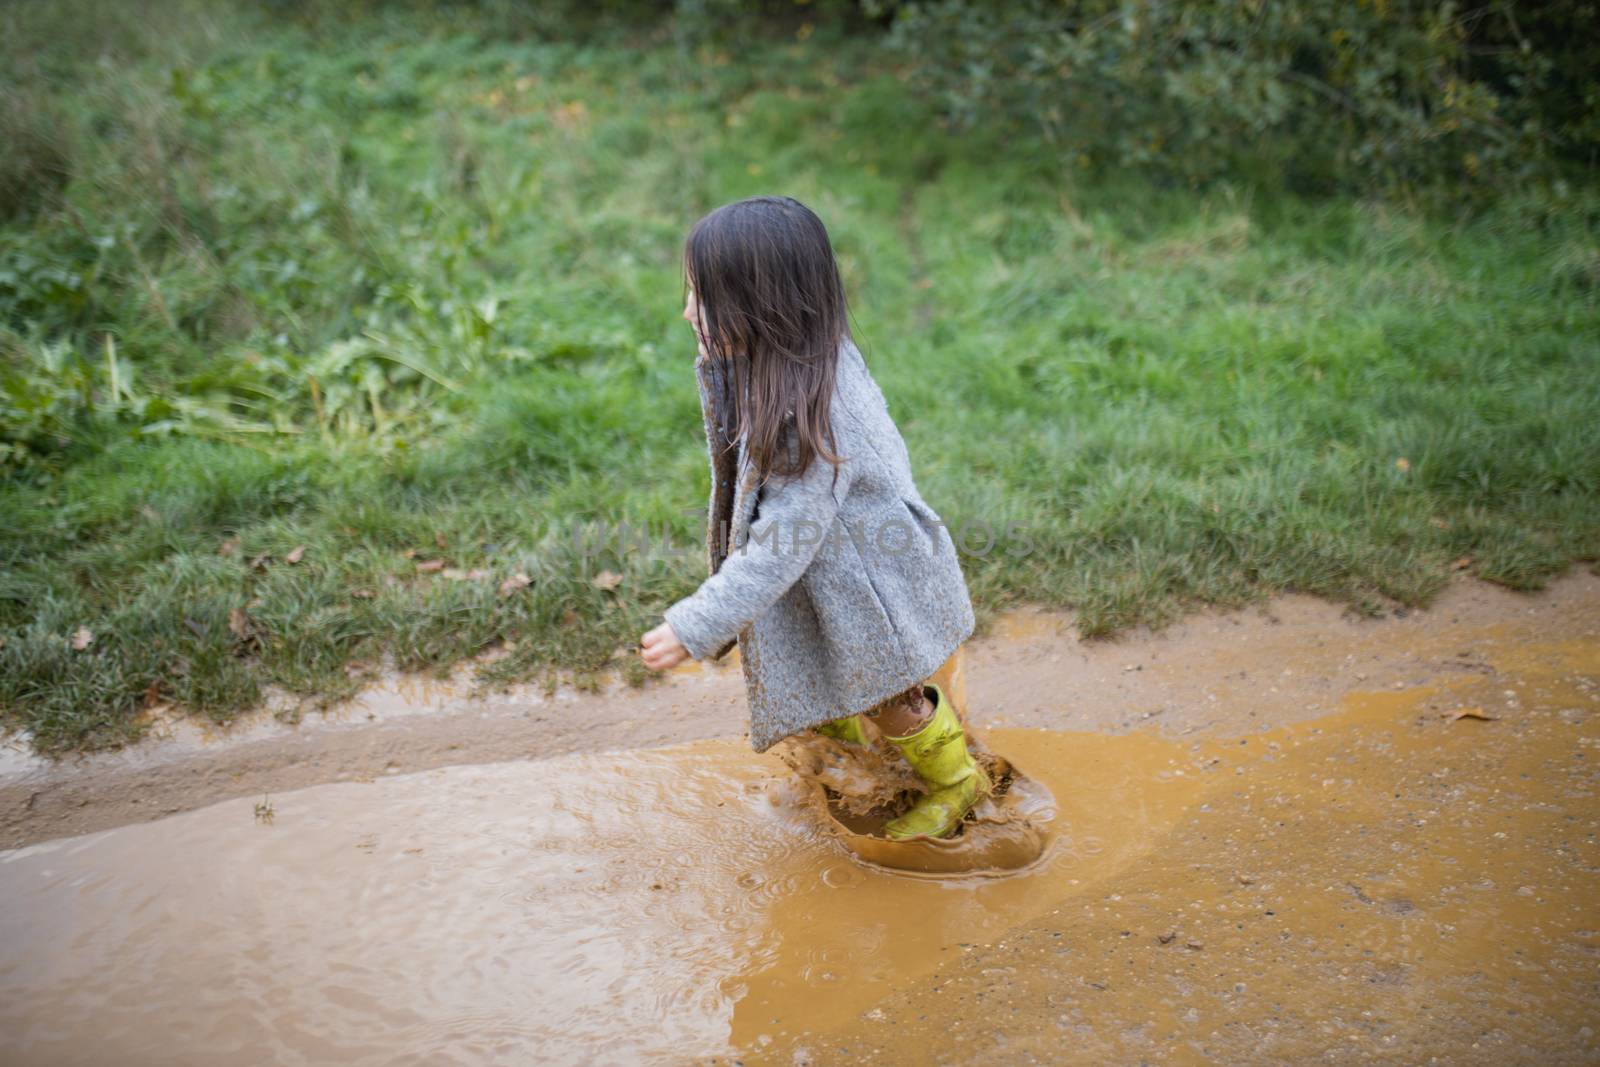 Happy little girl on dirt road joyfully jumping and splashing in muddy puddle. Young child having fun and getting dirty in puddles. Kids playing outside